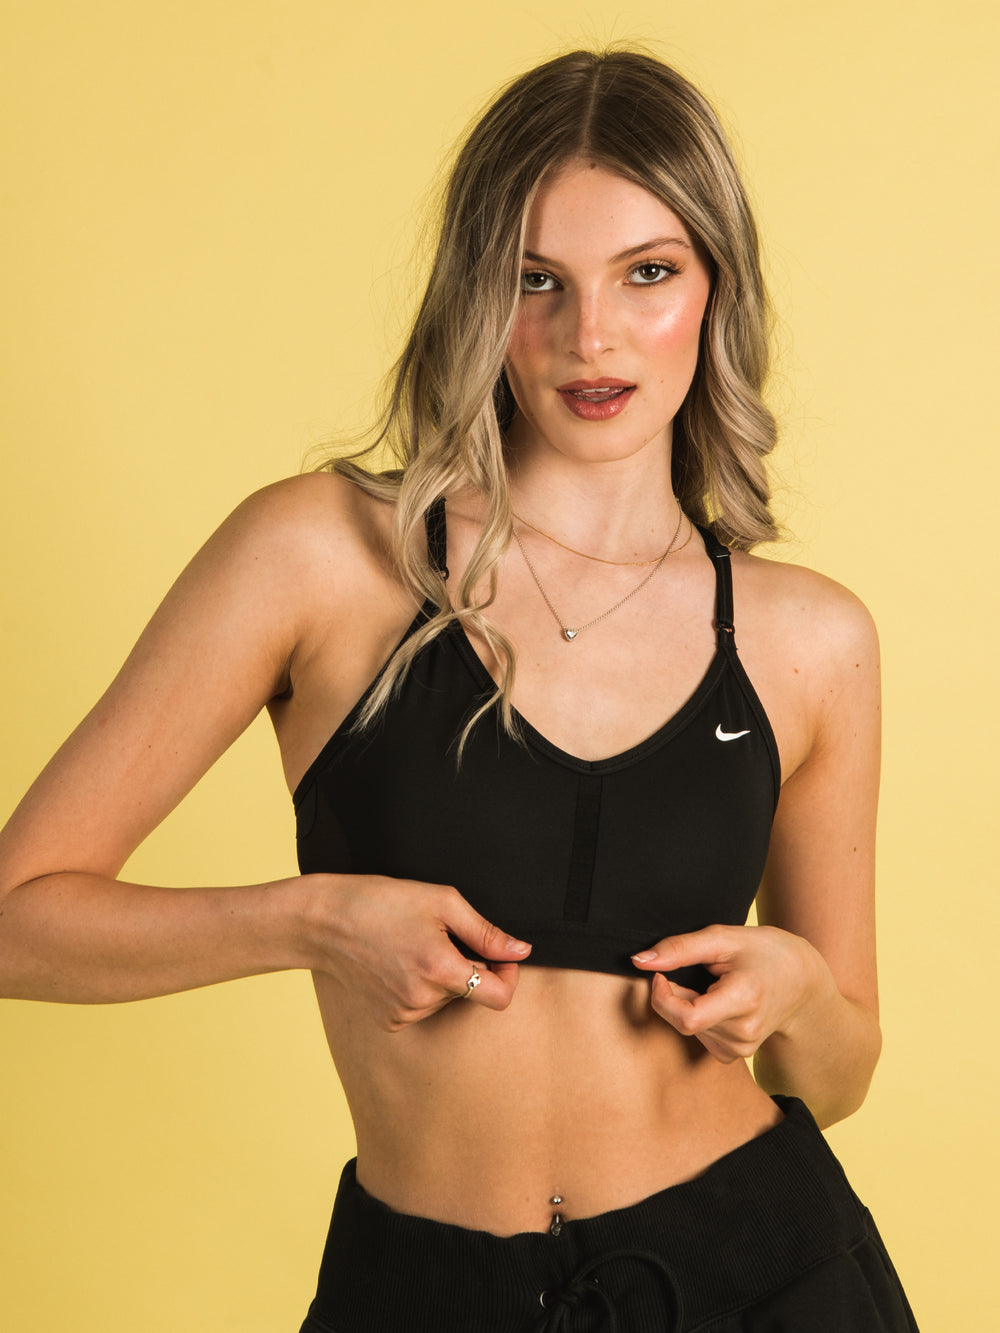 Nike Indy V-Neck Bra by Nike Online, THE ICONIC